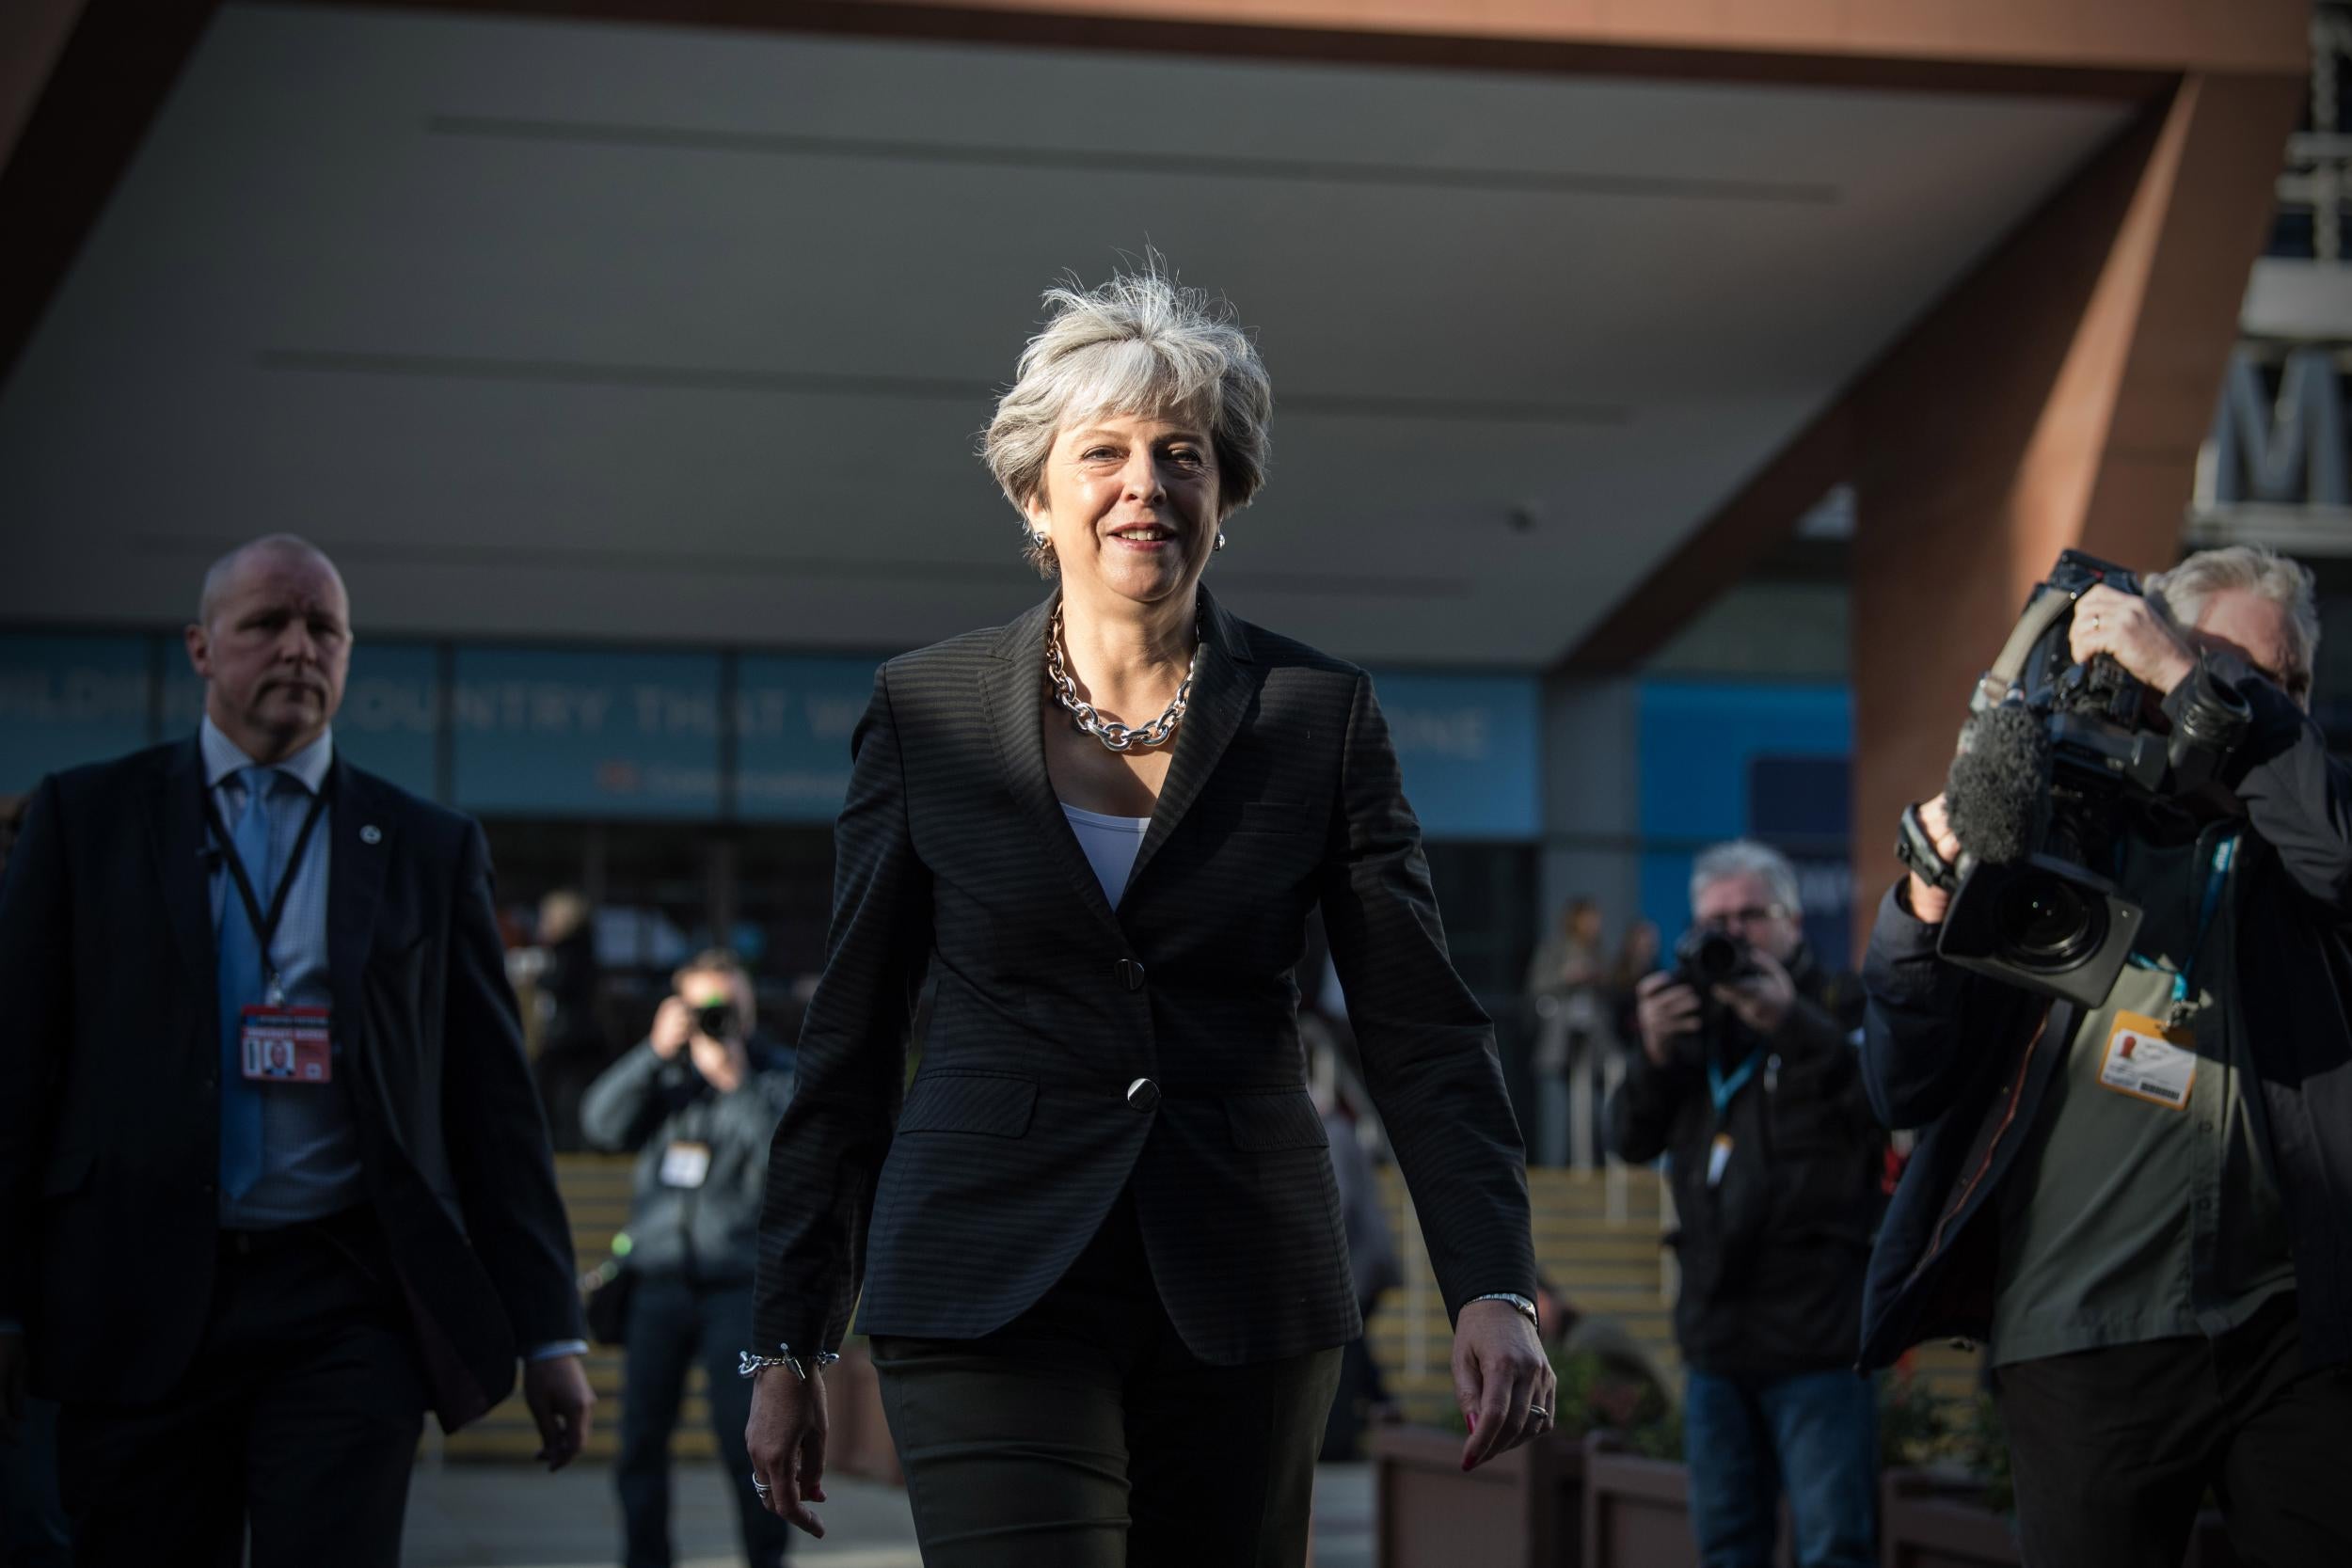 Theresa May faces a challenge from within her own party